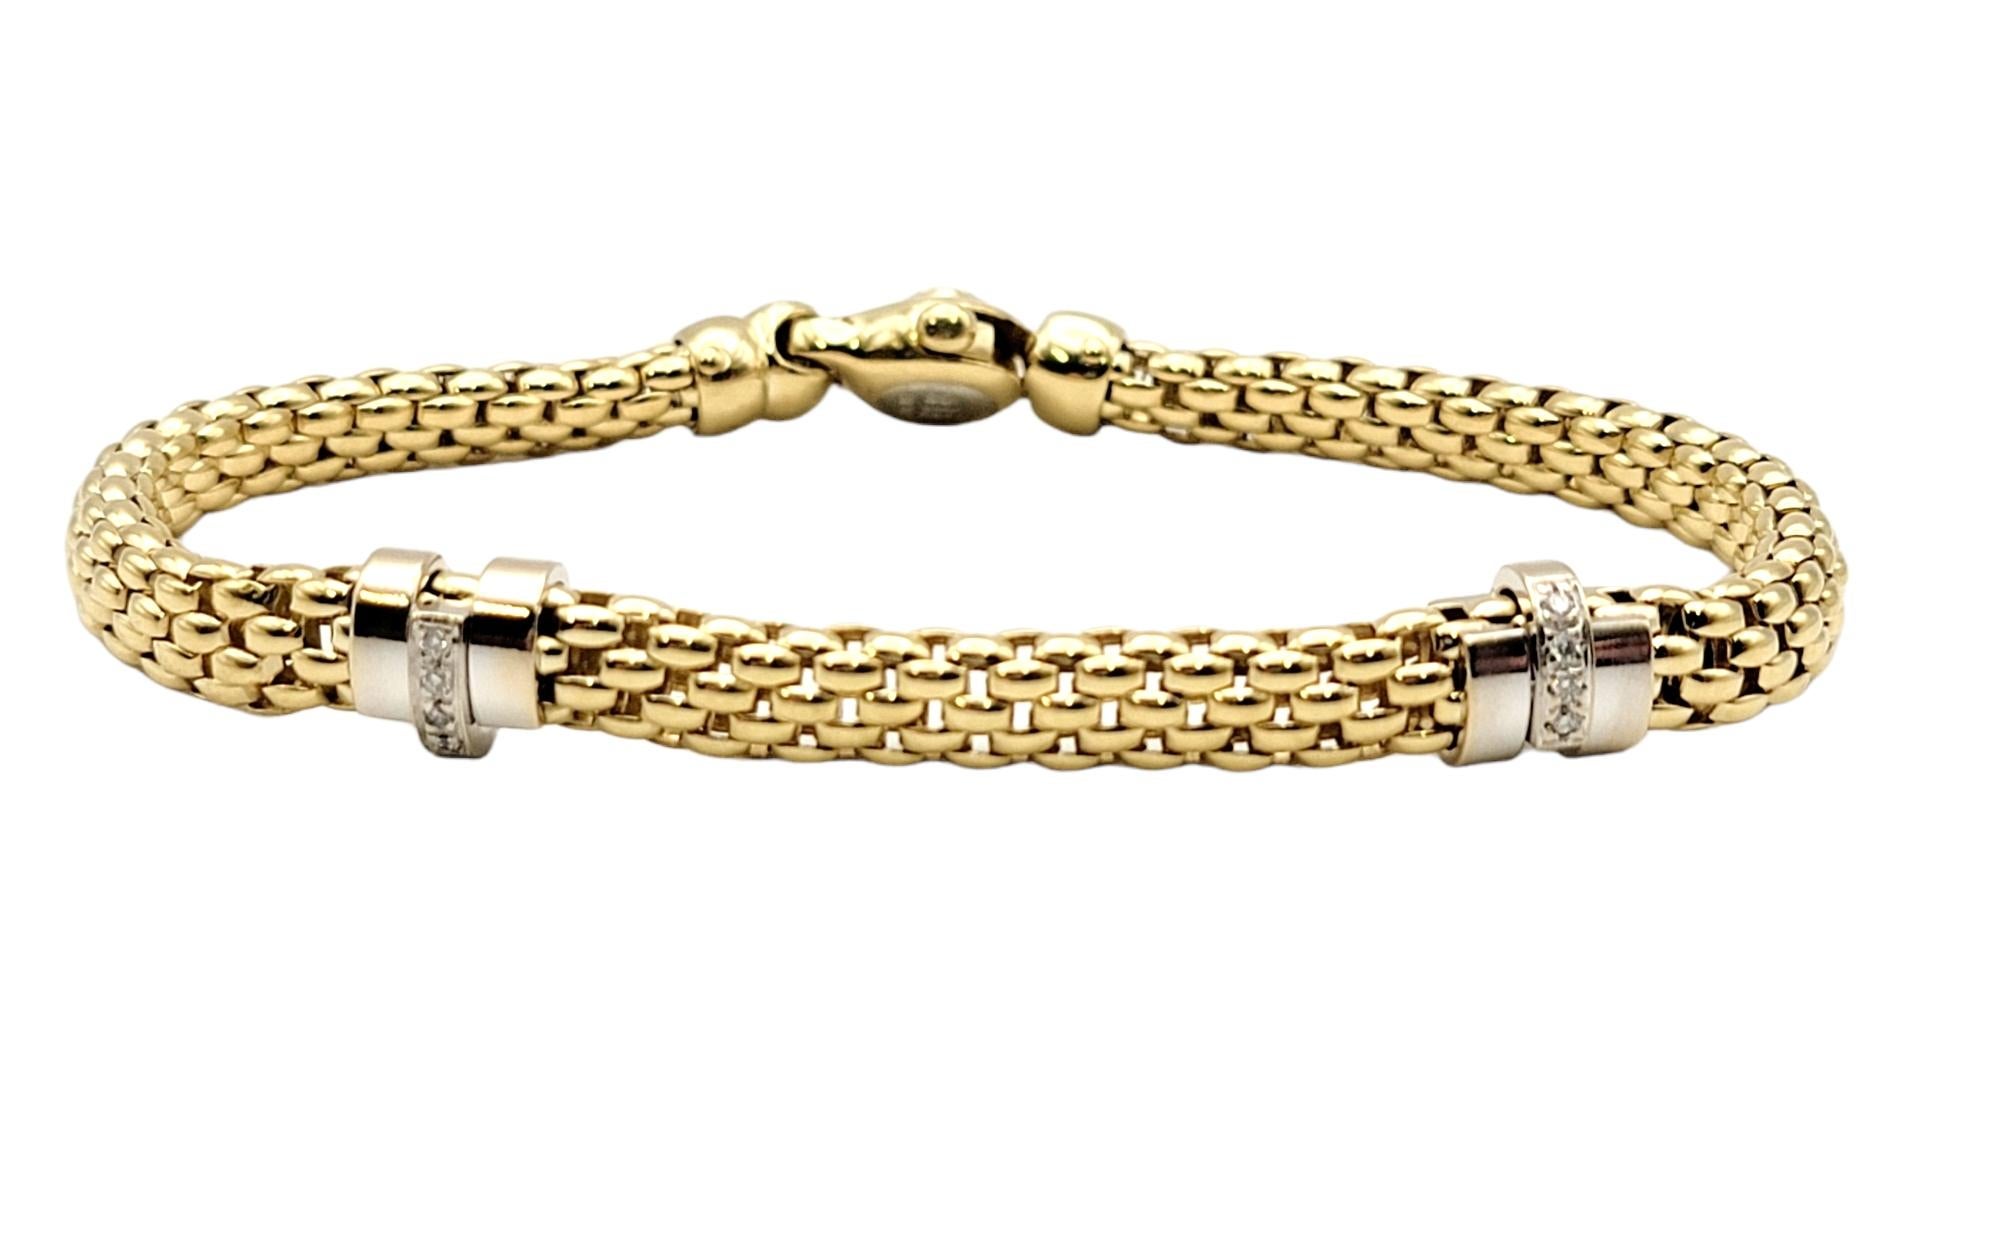 Contemporary designer bracelet by FOPE will wrap your wrist in modern sophistication. The flexible mesh design of this beautiful piece offers a comfortable elegance while the natural diamond accents add some sparkle and shine to your look.  

Metal: